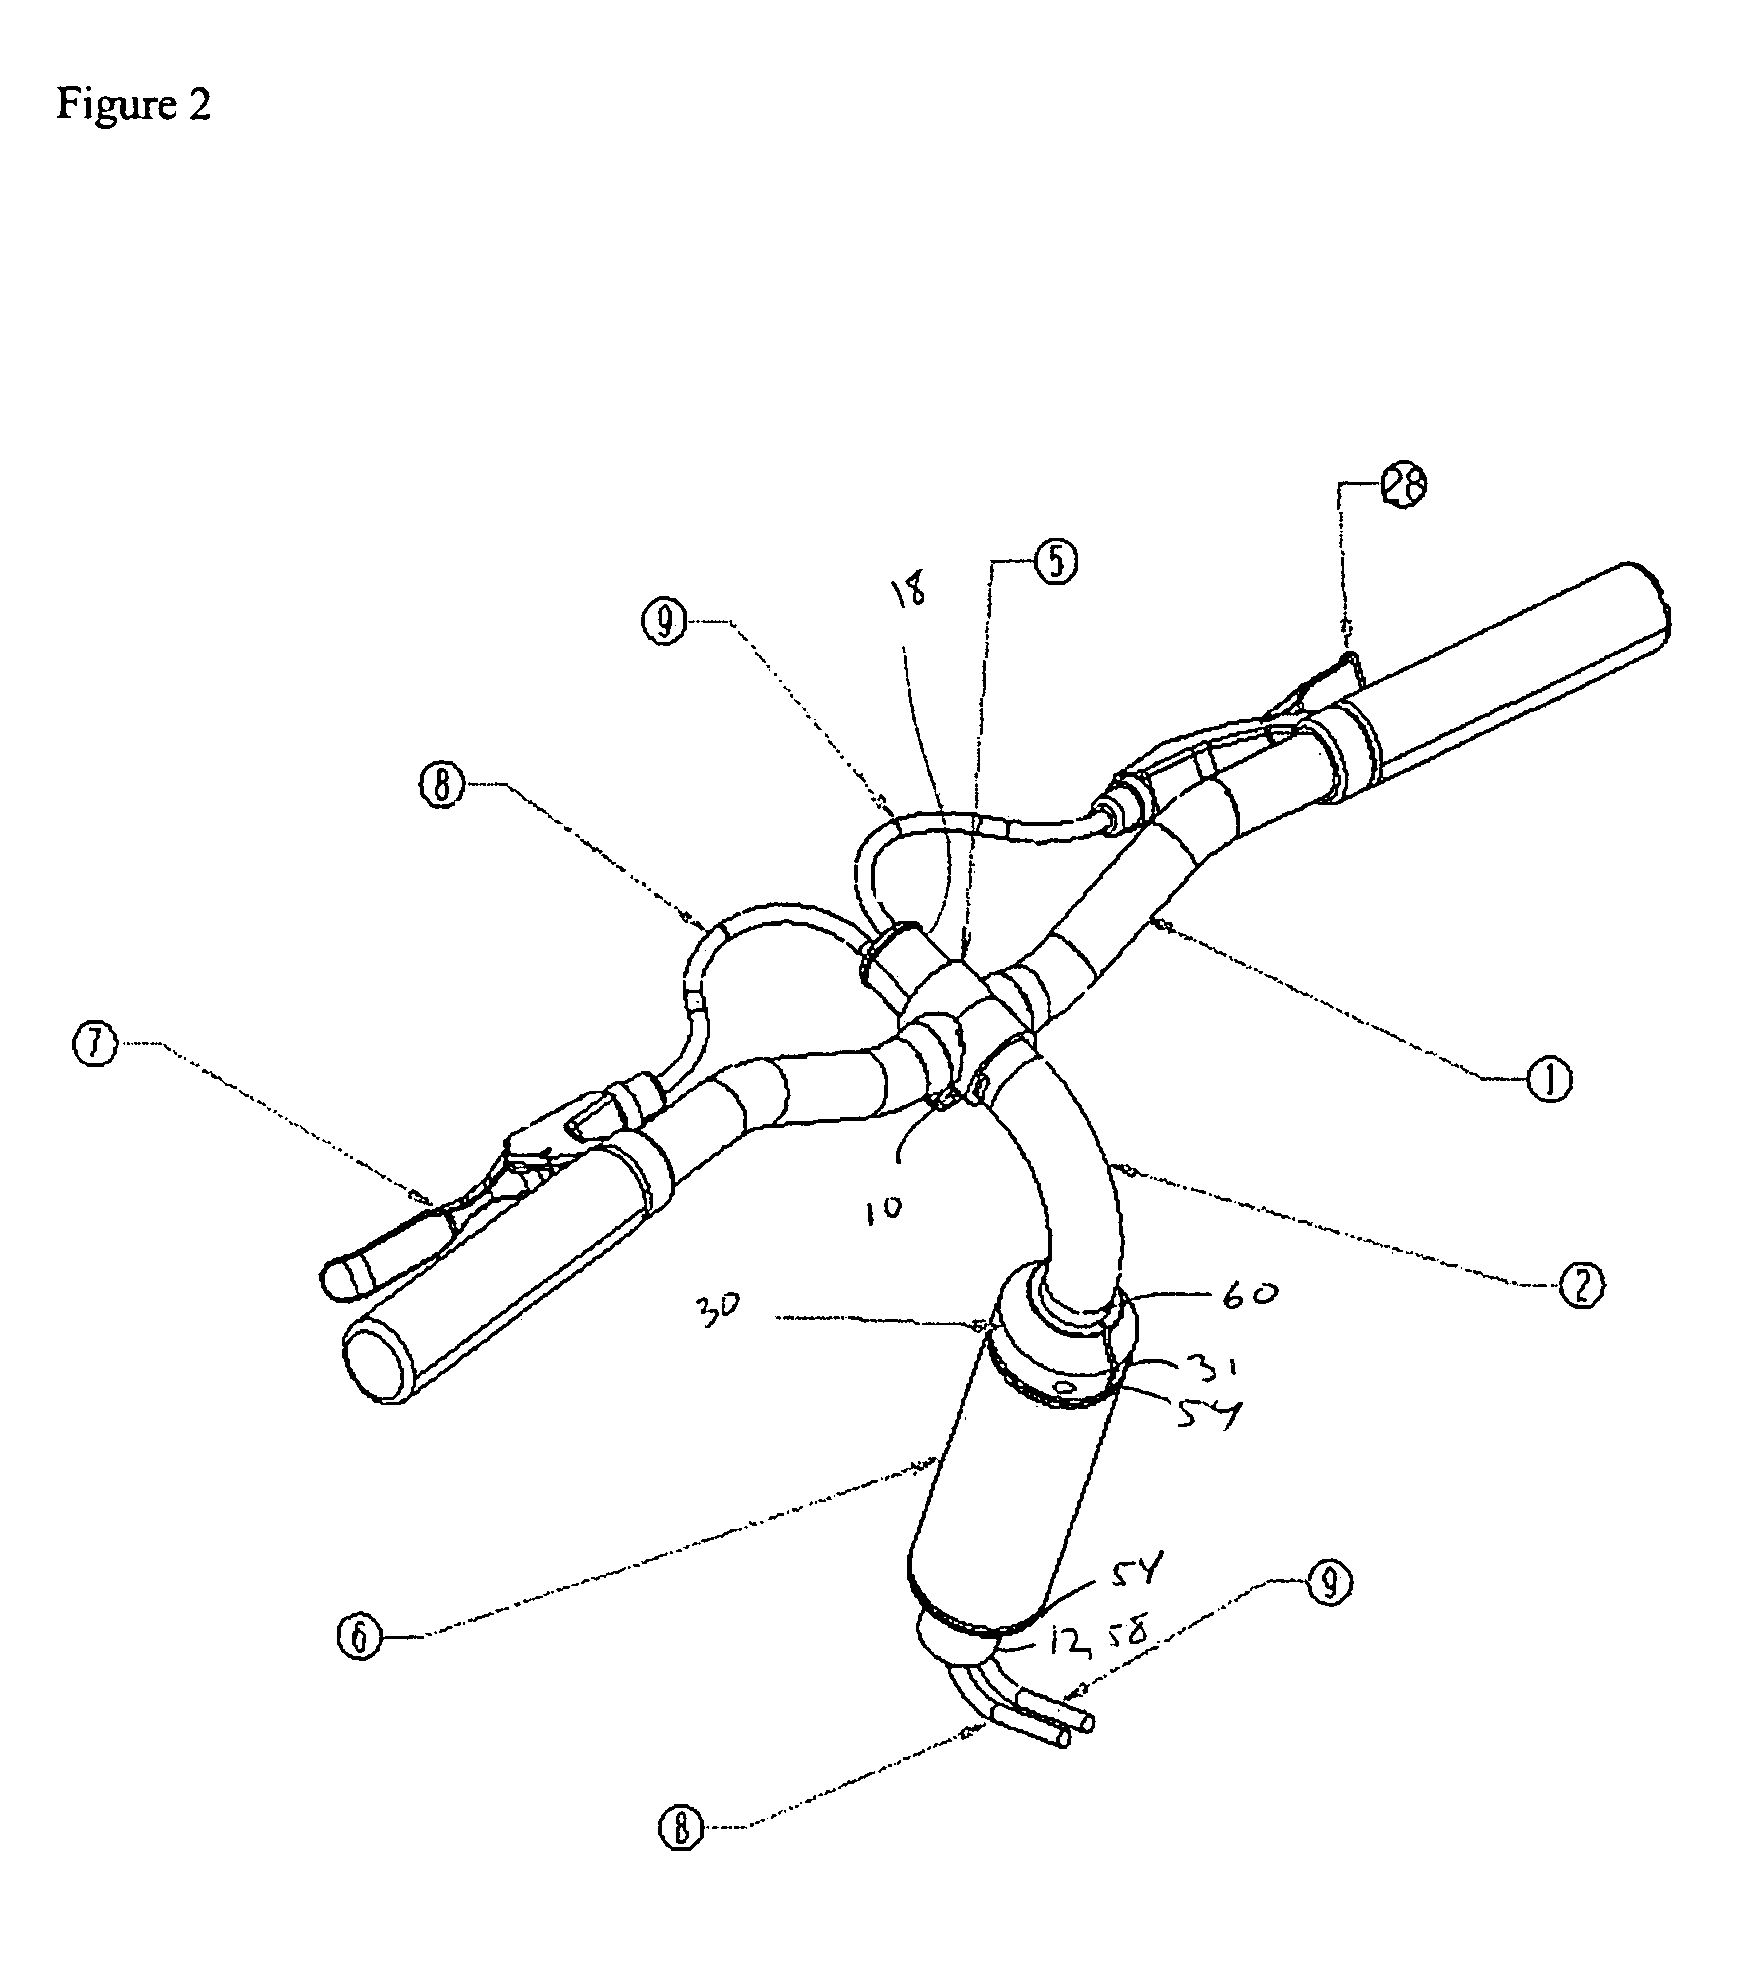 Bicycle having internally routed control cables